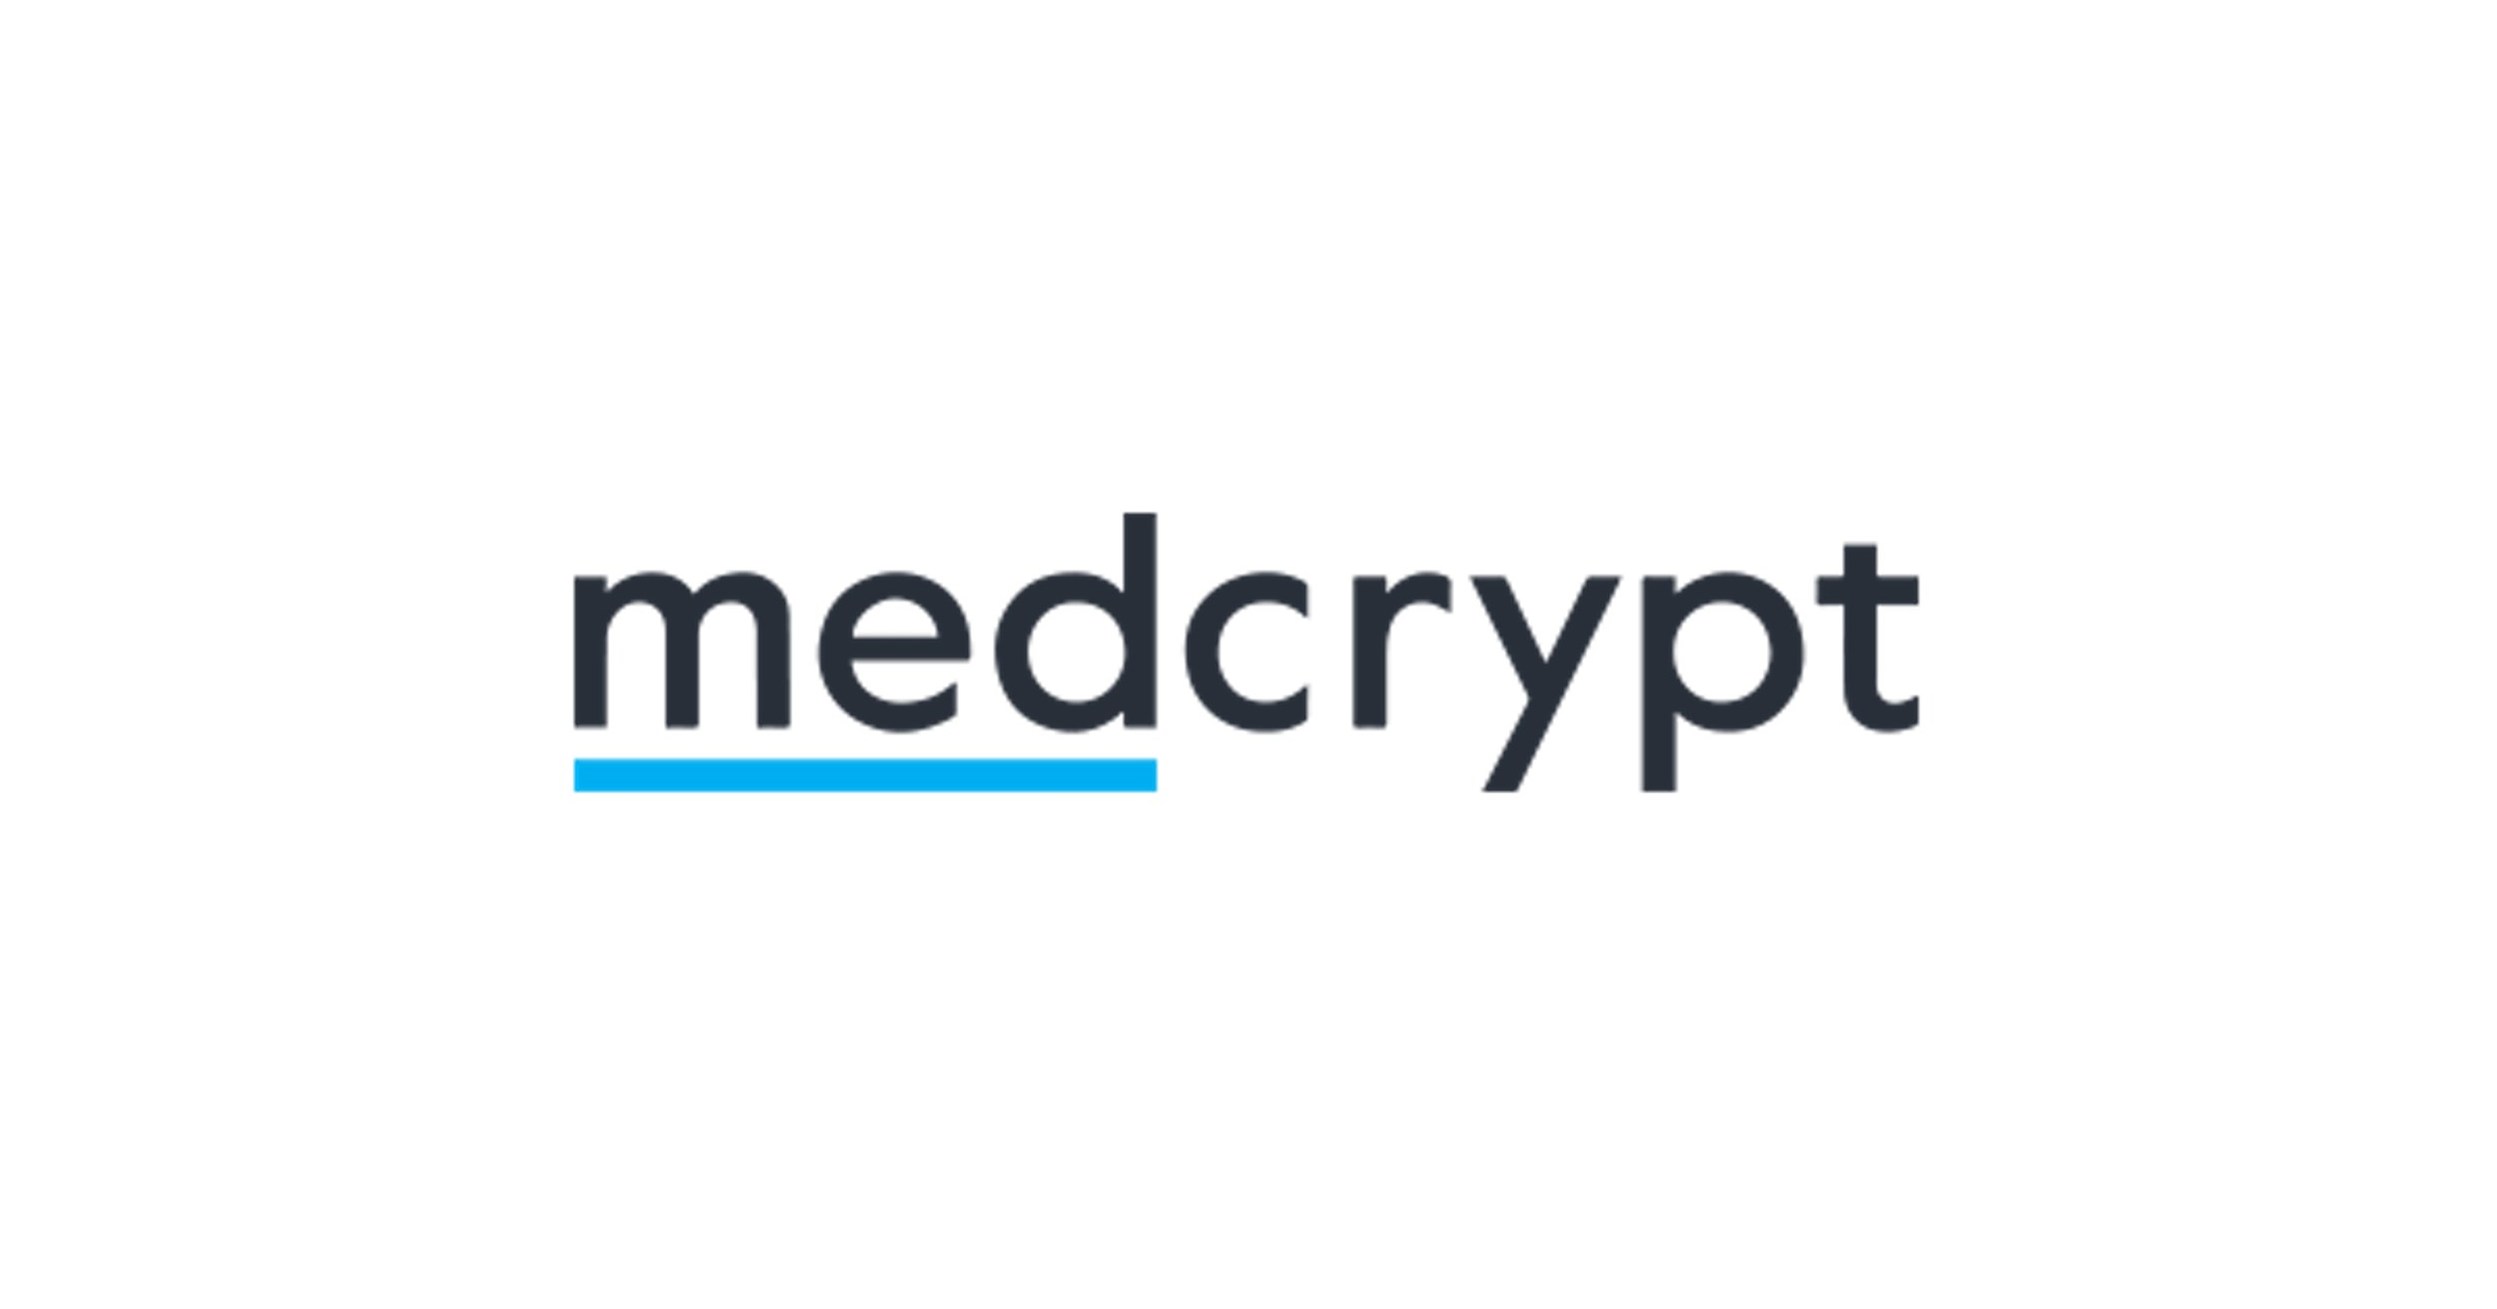 MedCrypt Joins Microsoft Azure Marketplace Offering One of the Only Cryptography Tools with an API Specifically Designed for Medical Devices